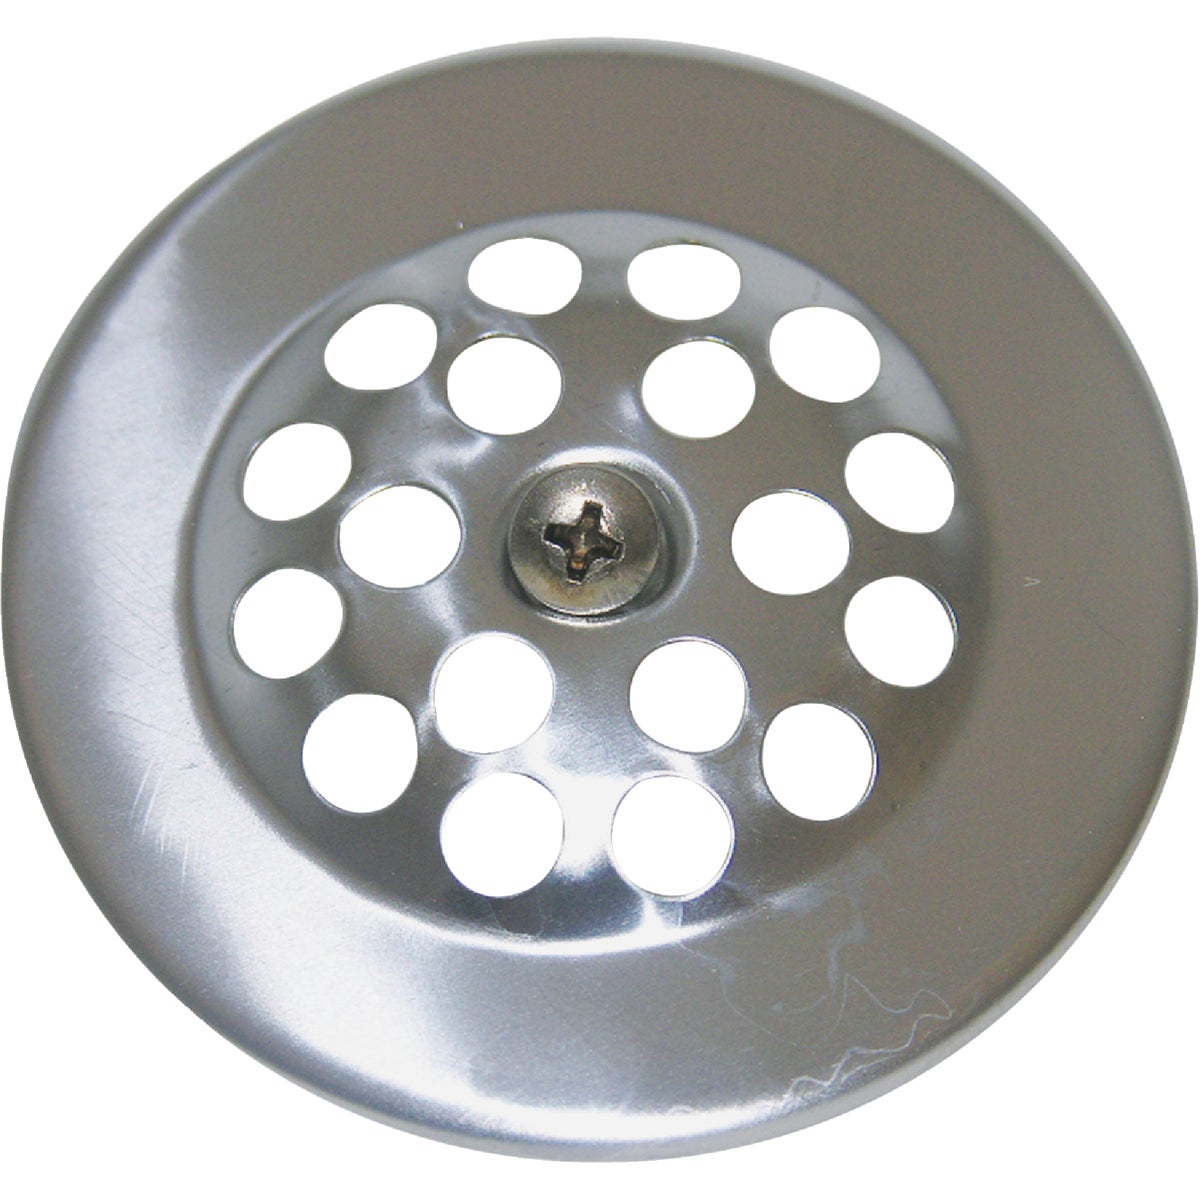 Lasco 2-7/8 In. Tub Drain Strainer with Chrome Plated Finish